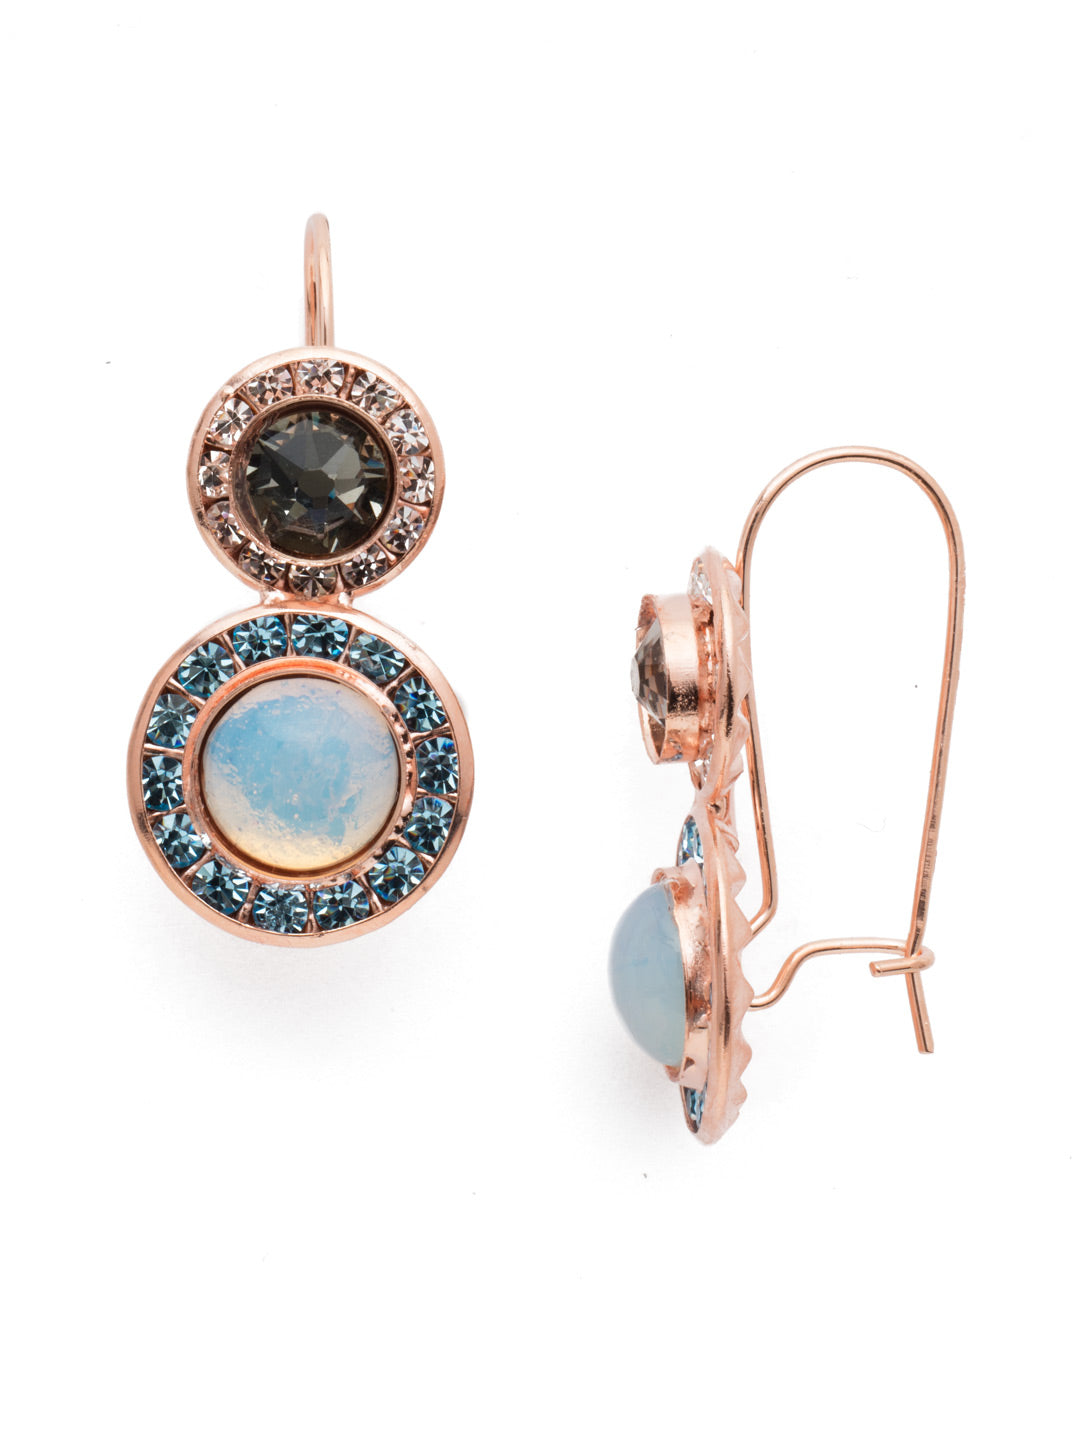 Hartford Dangle Earrings - EET13RGCAZ - The Hartford Dangle Earrings double the fun with two drops of circular stones rimmed in super sparkly crystals. They're the perfect pair to wear anywhere. From Sorrelli's Crystal Azure collection in our Rose Gold-tone finish.